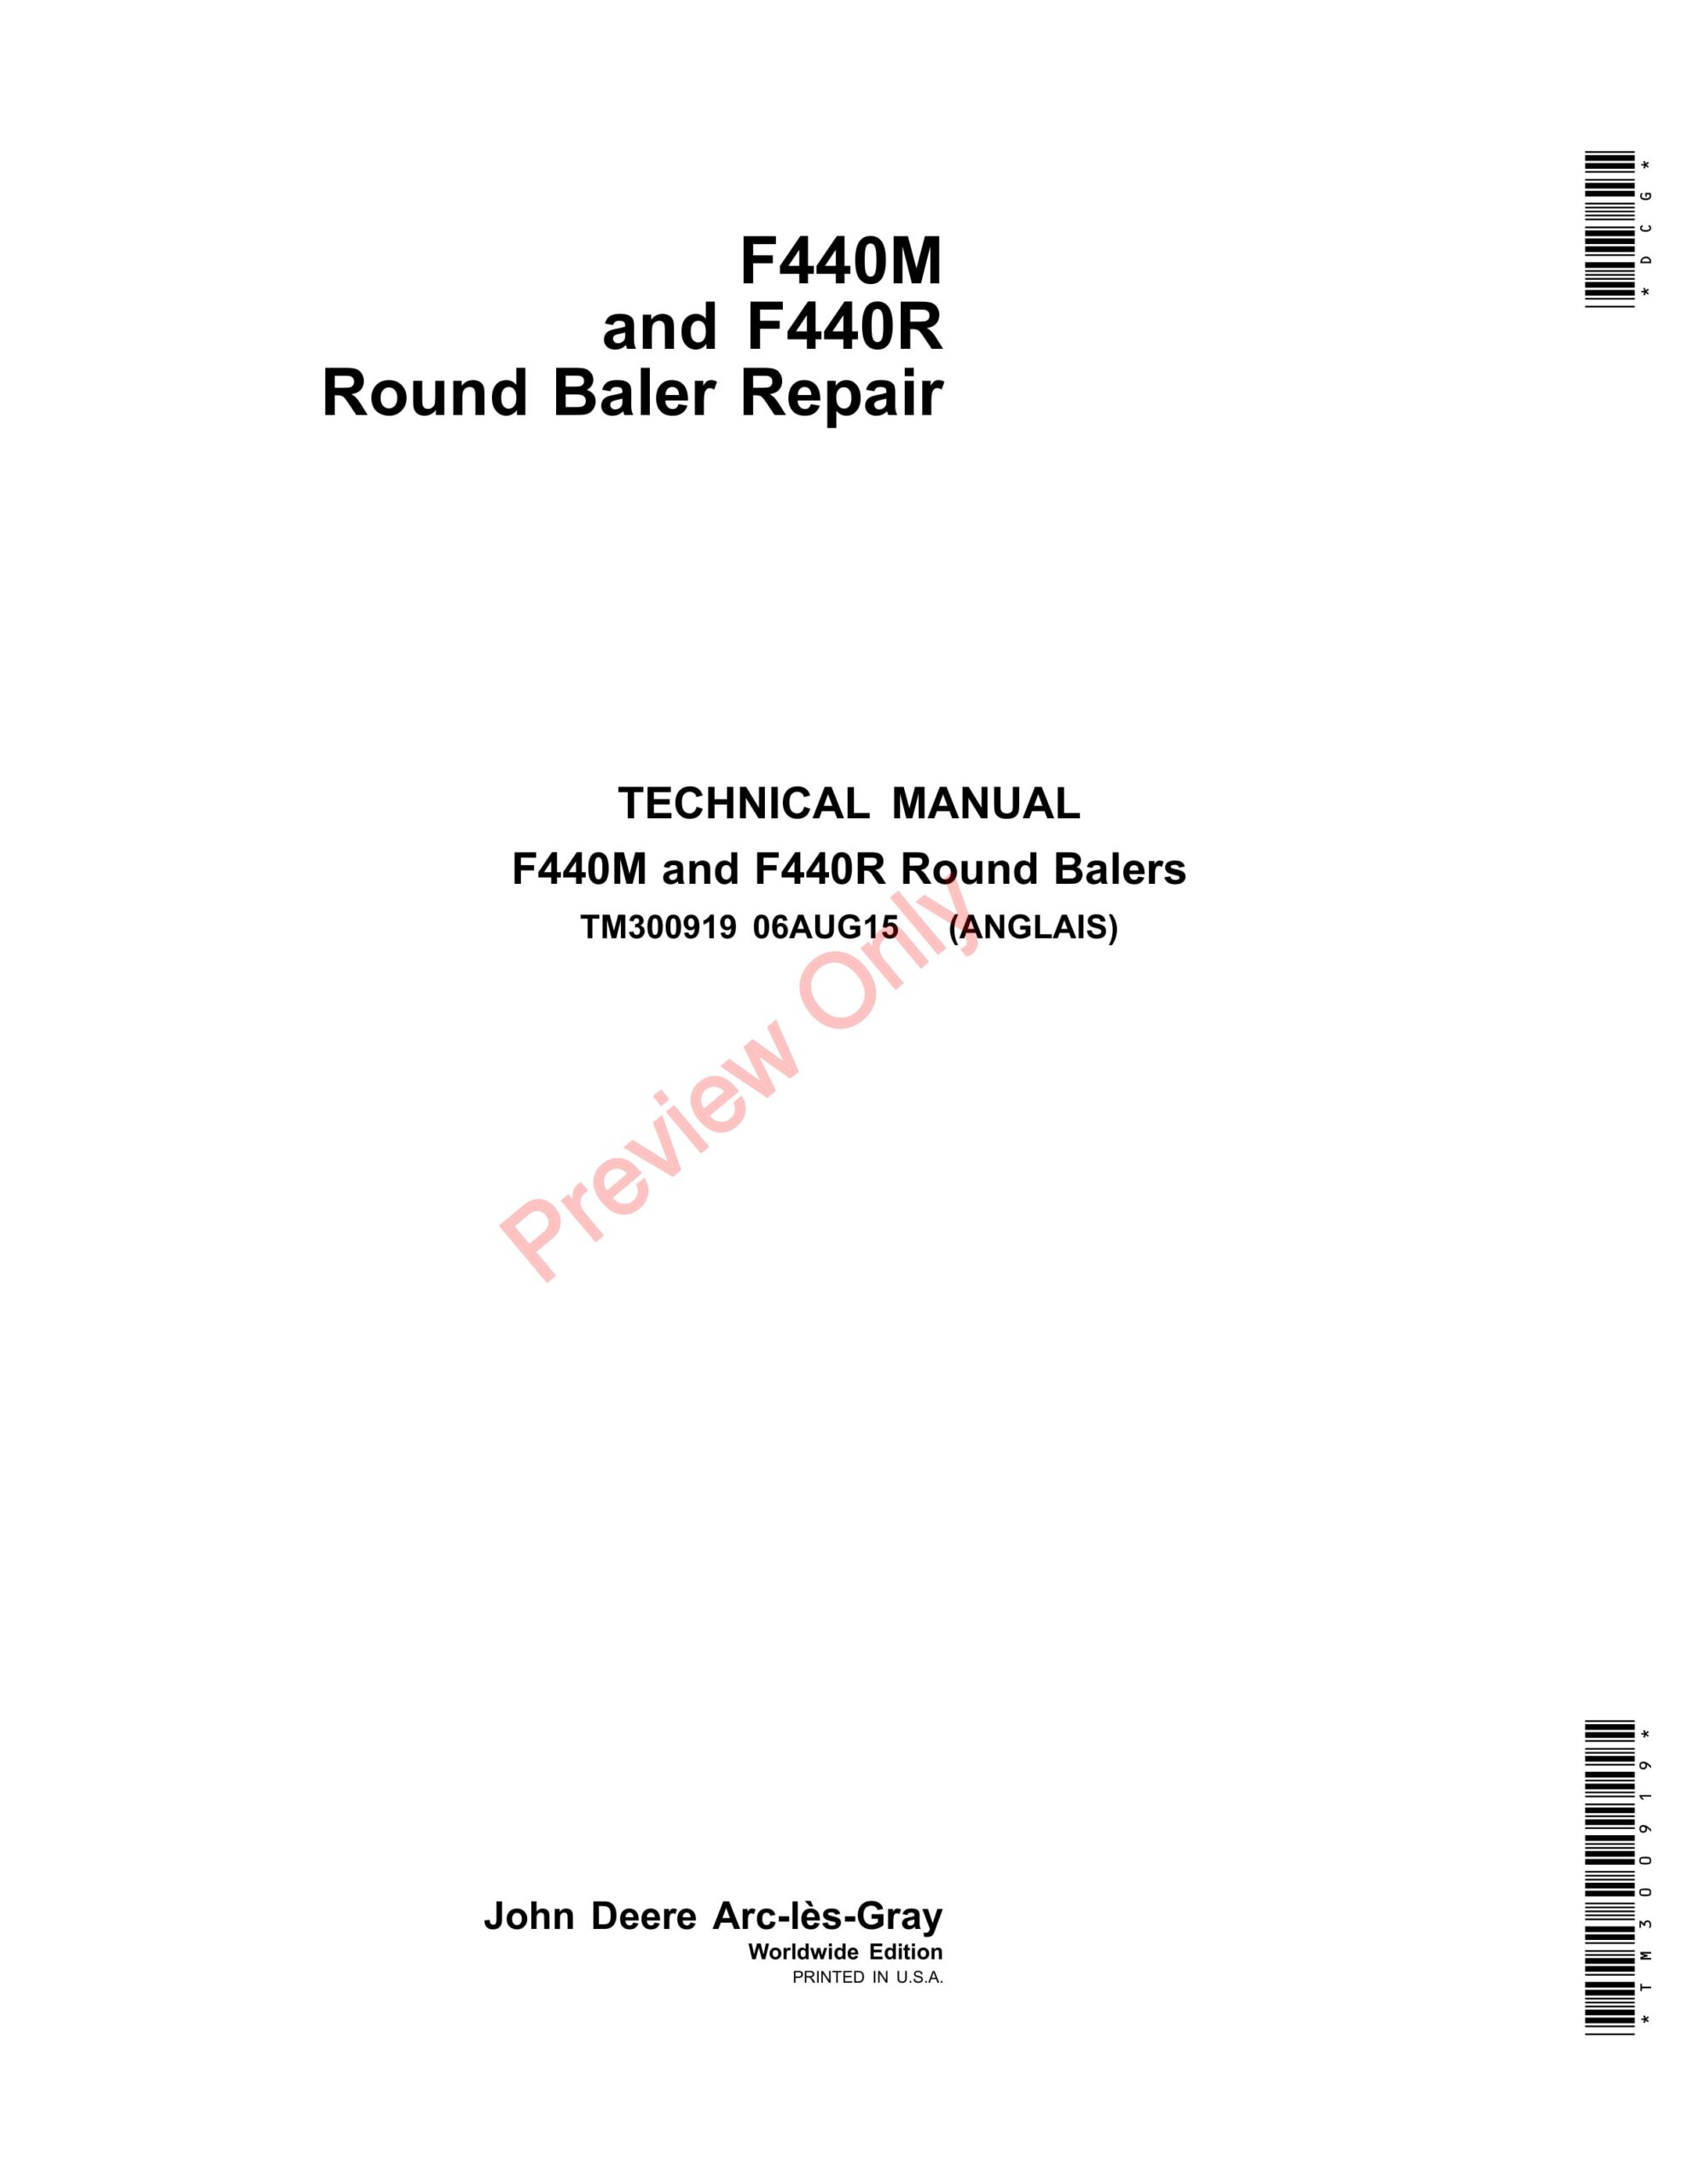 John Deere F440M and F440R Round Balers Technical Manual TM300919 06AUG15-1